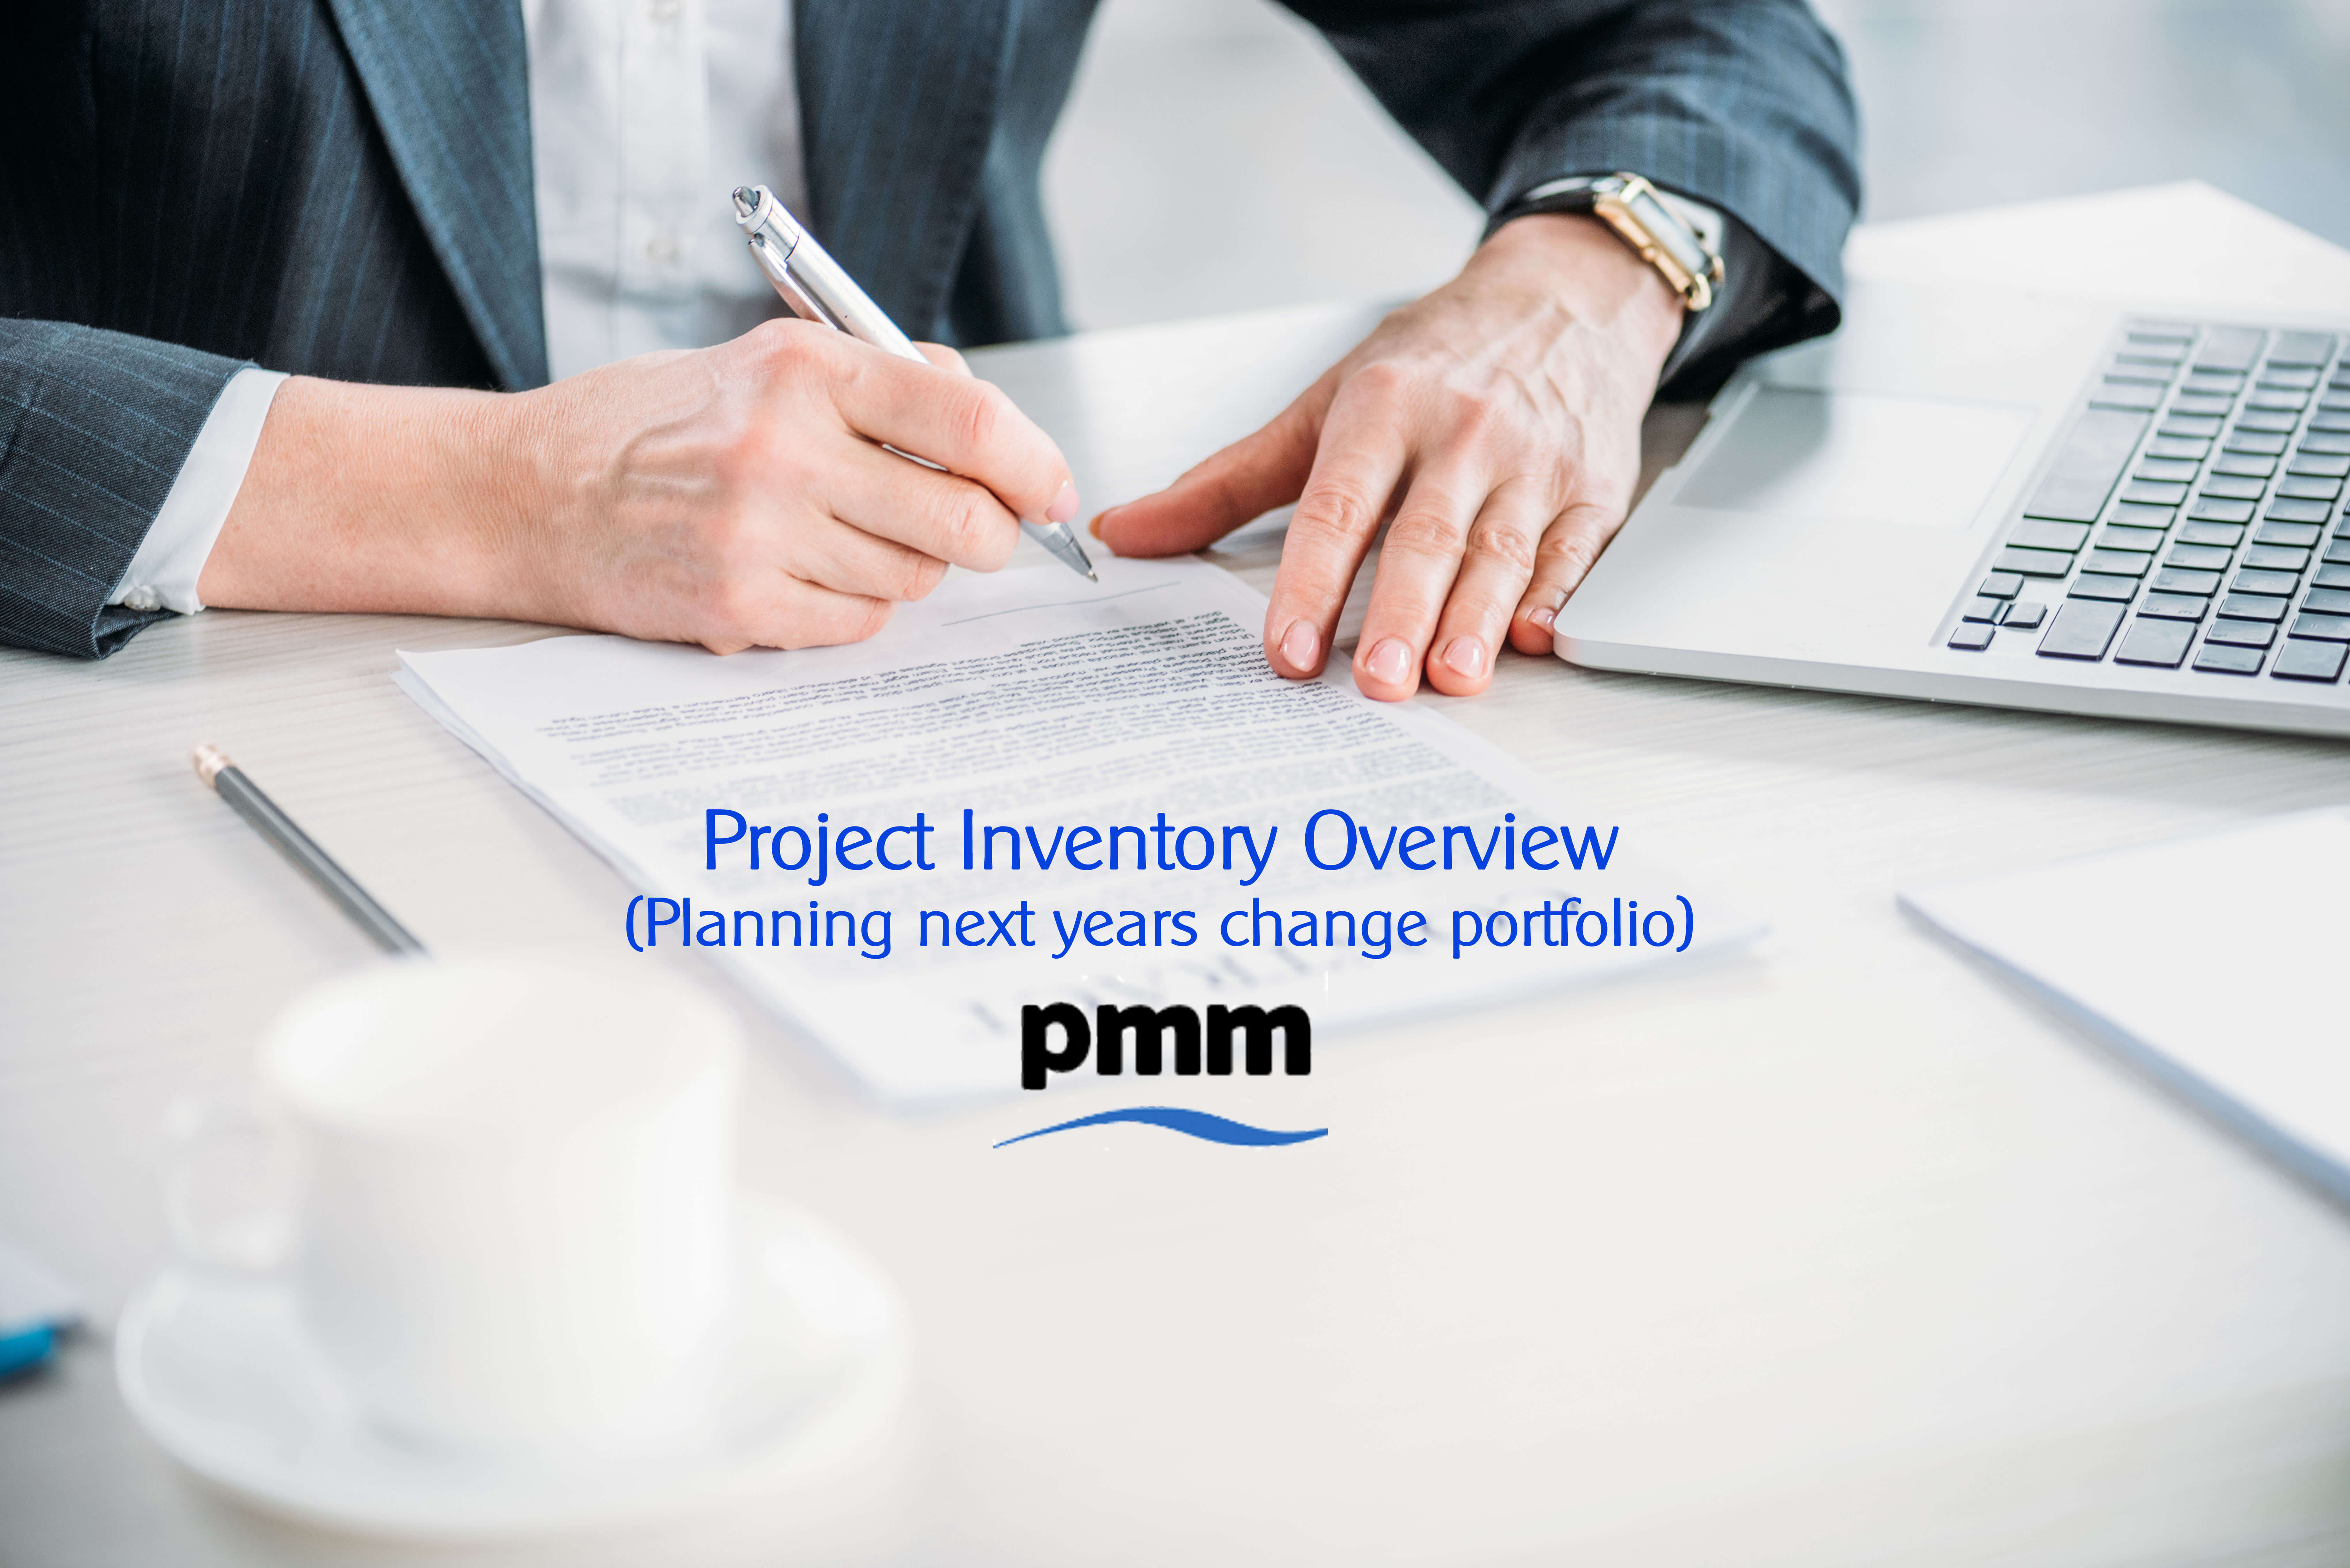 Project inventory overview (planning next years change portfolio)